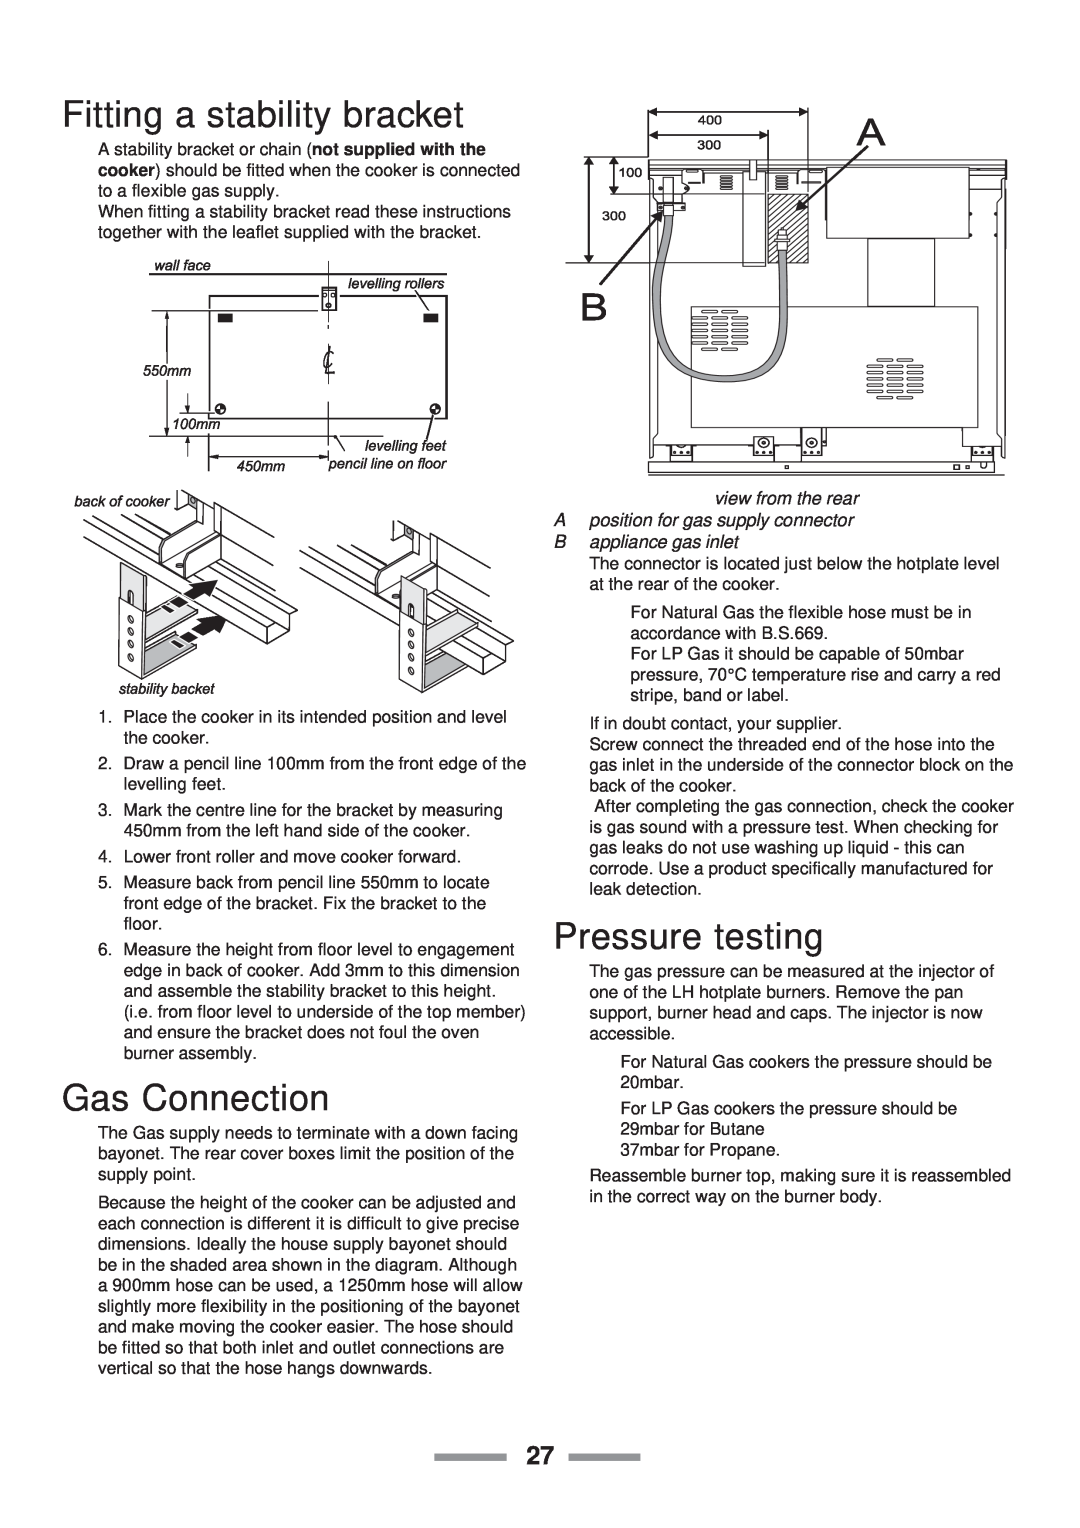 Rangemaster Toledo 90 Gas Fitting a stability bracket, Gas Connection, Pressure testing, B appliance gas inlet 